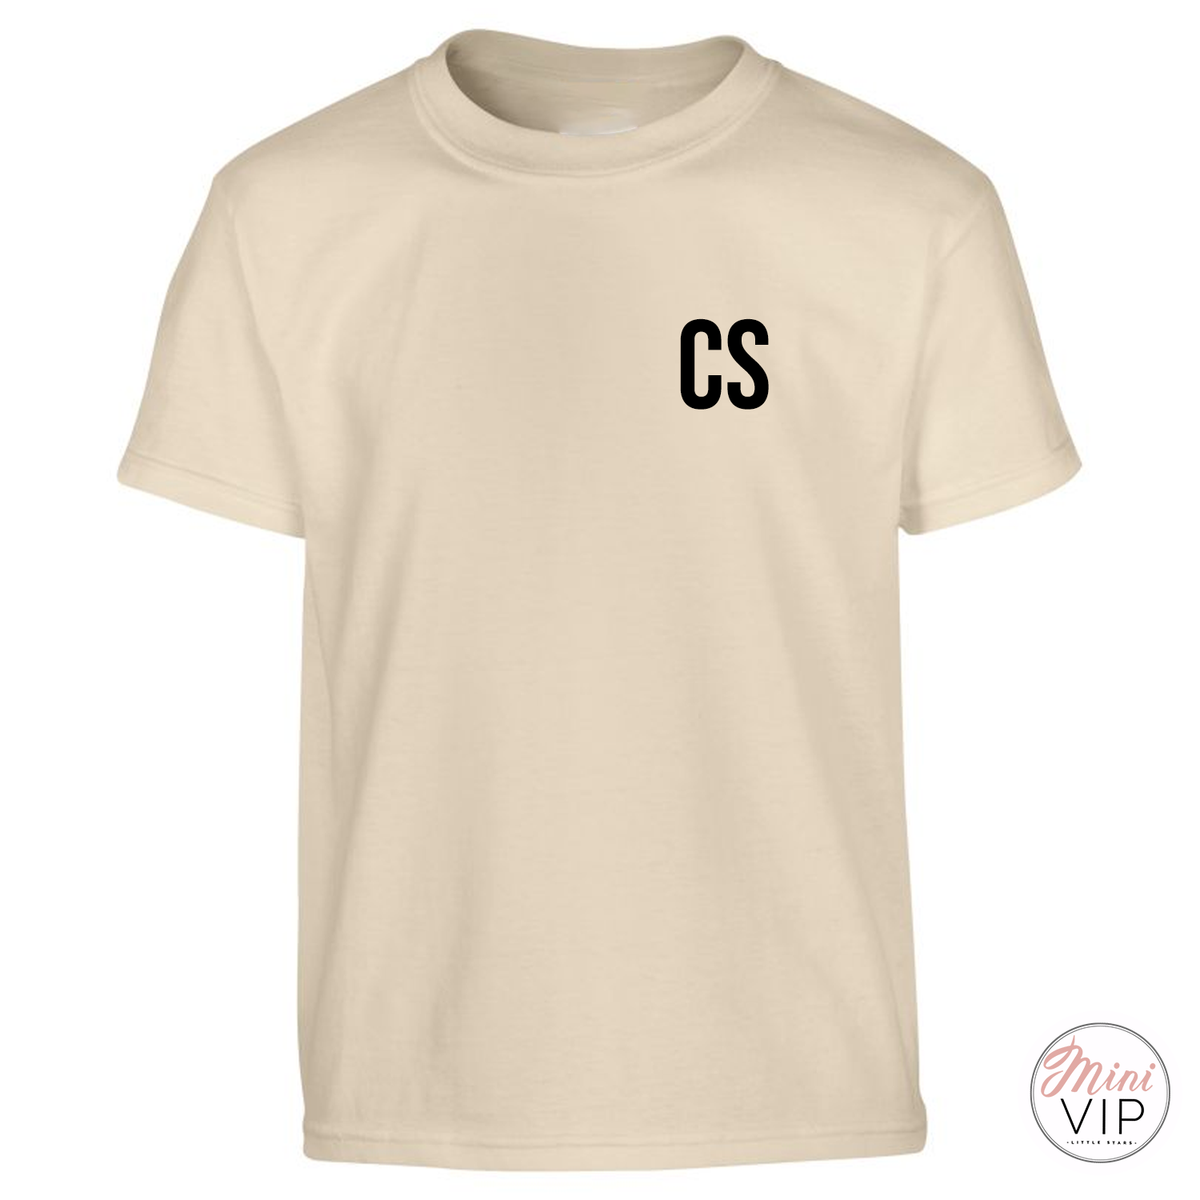 Sand T-Shirt with Black Initials - personalised